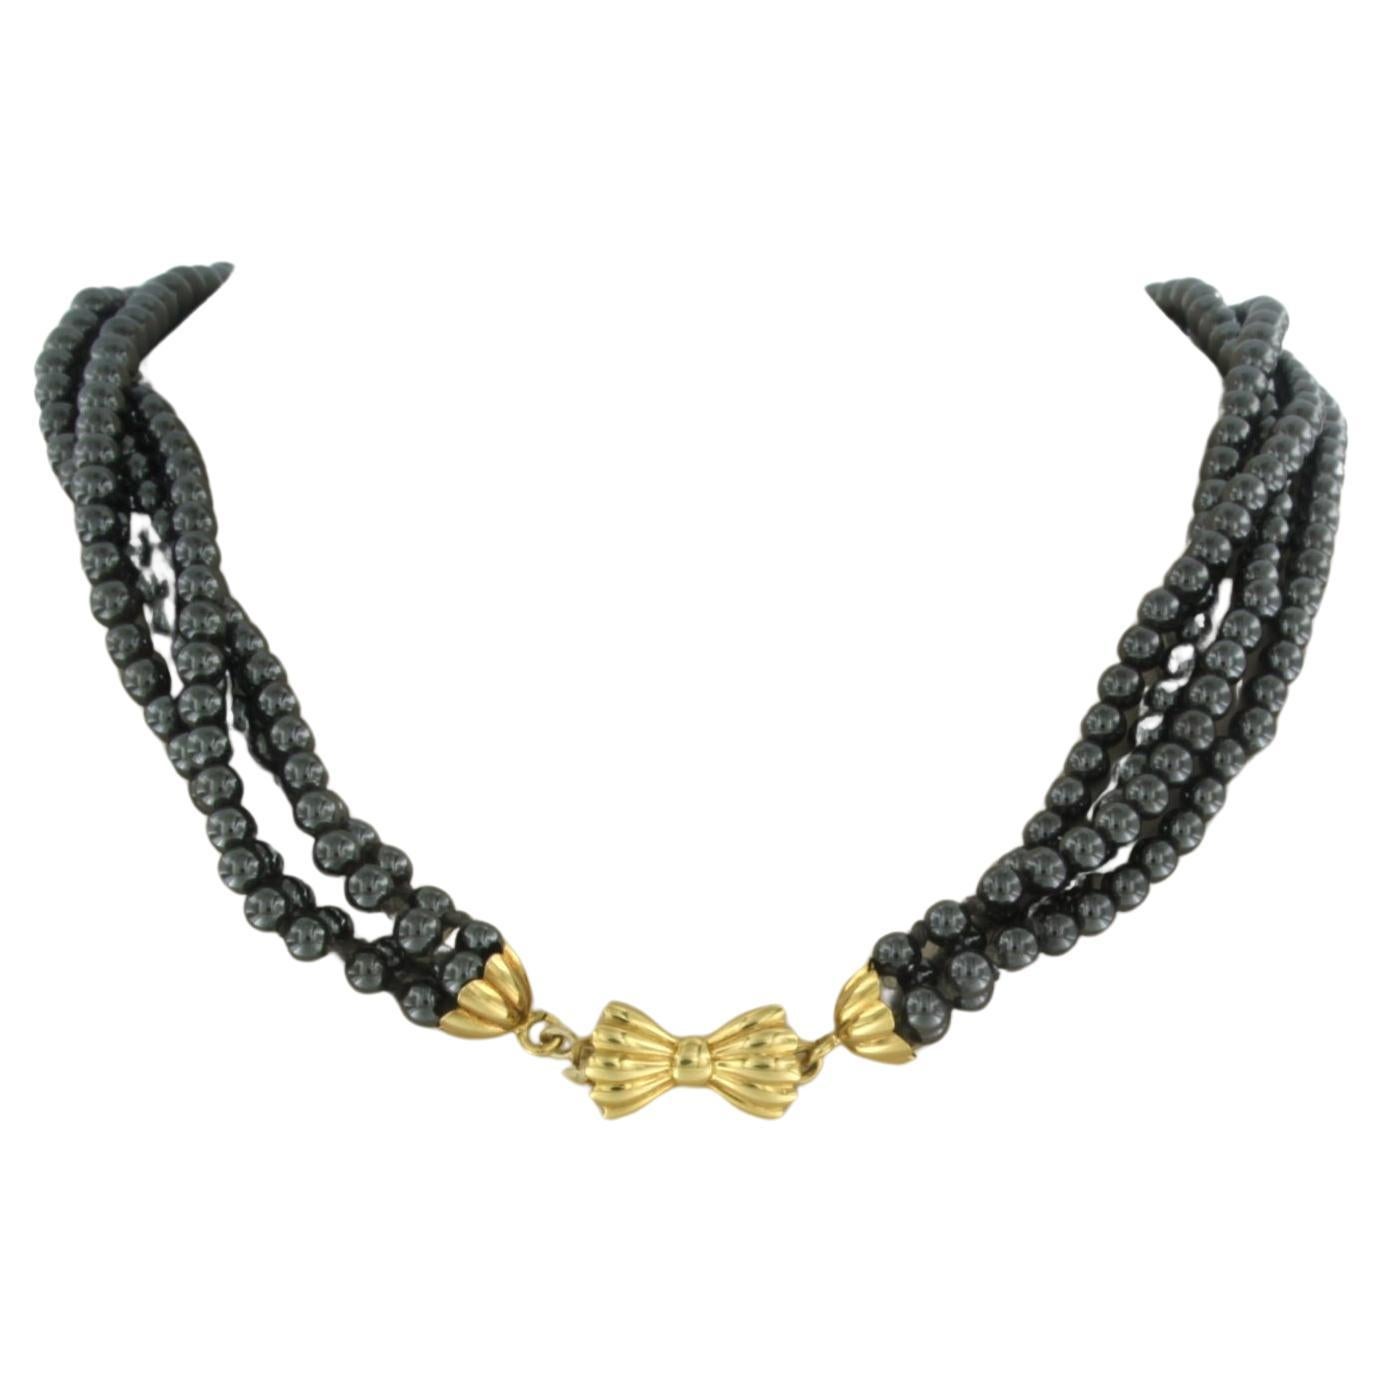 18k yellow gold clasp on a hematite bead necklace - 40 cm long For Sale